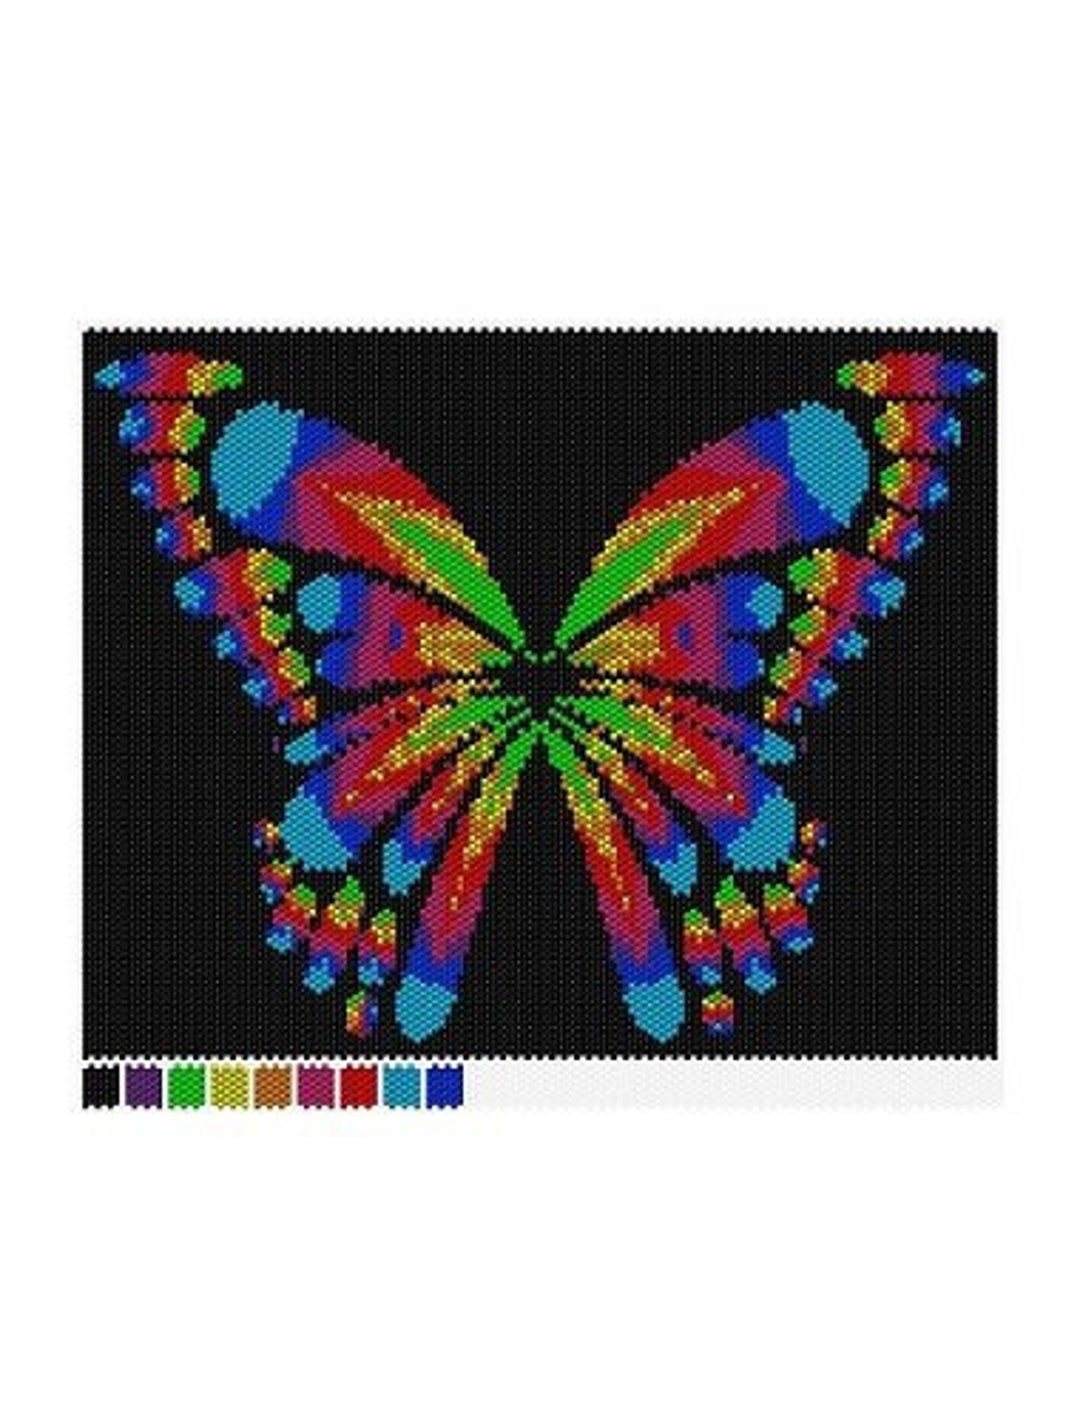 Butterfly Perler Bead Patterns (With Free Printable Template)